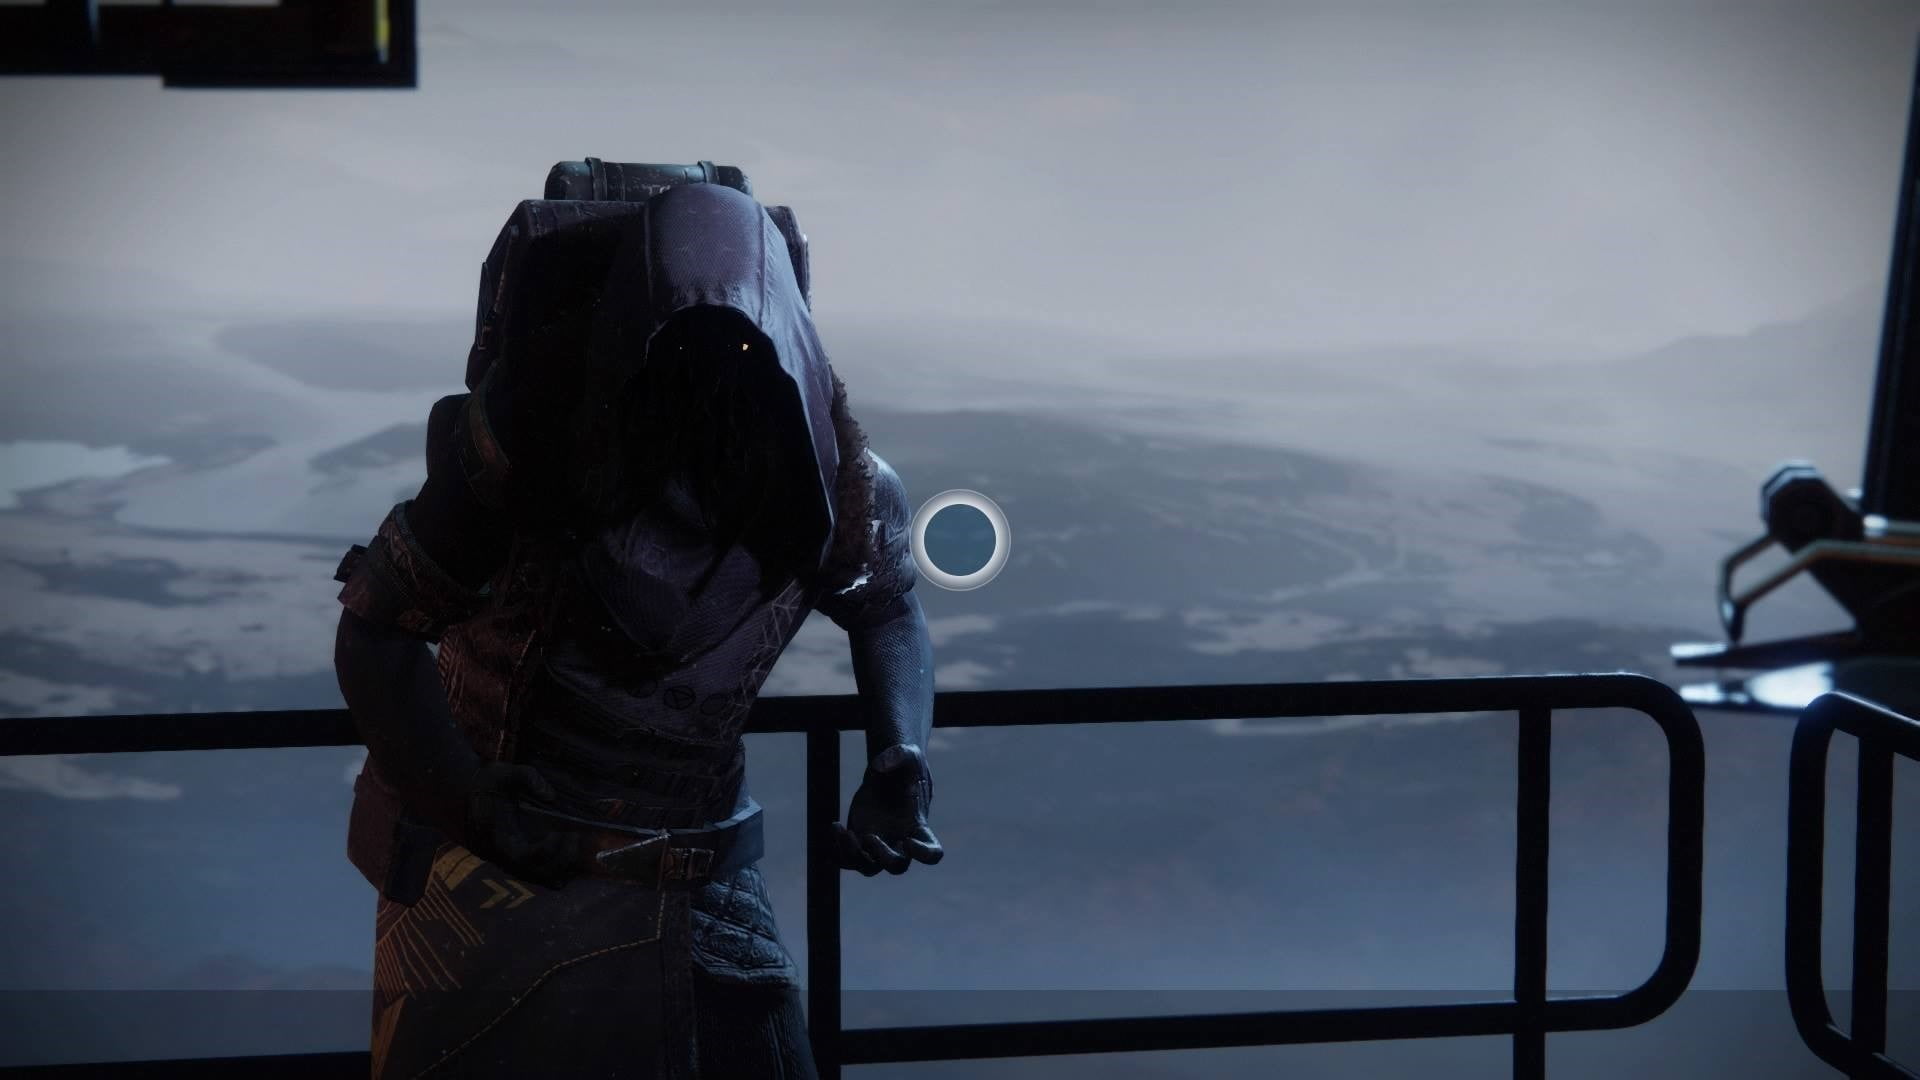 Destiny 2 Xur Inventory – Hard Light, Crown of Tempests,
Lion Rampant, and More